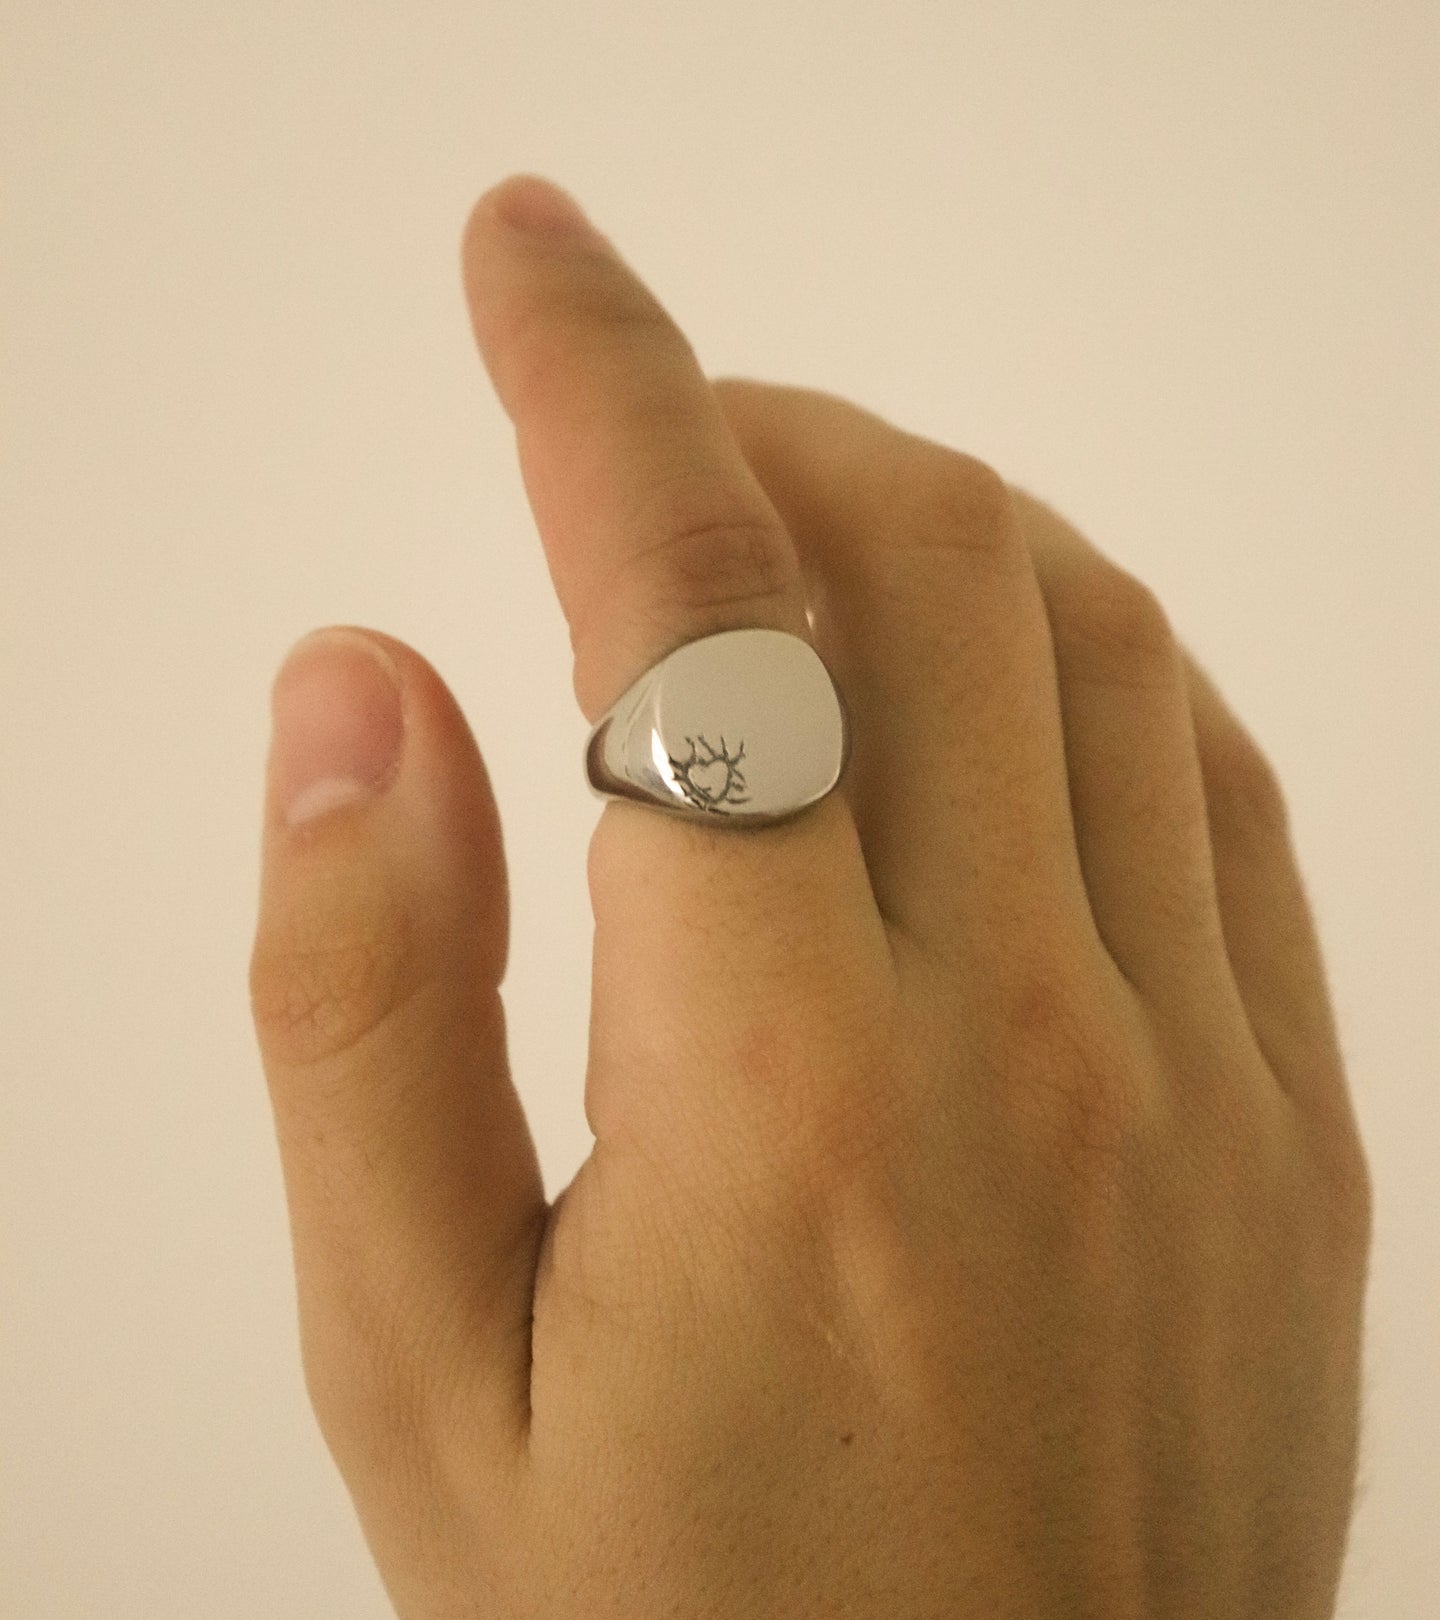 Torn Heart Signet Ring - Fashion Jewelry by Yordy.